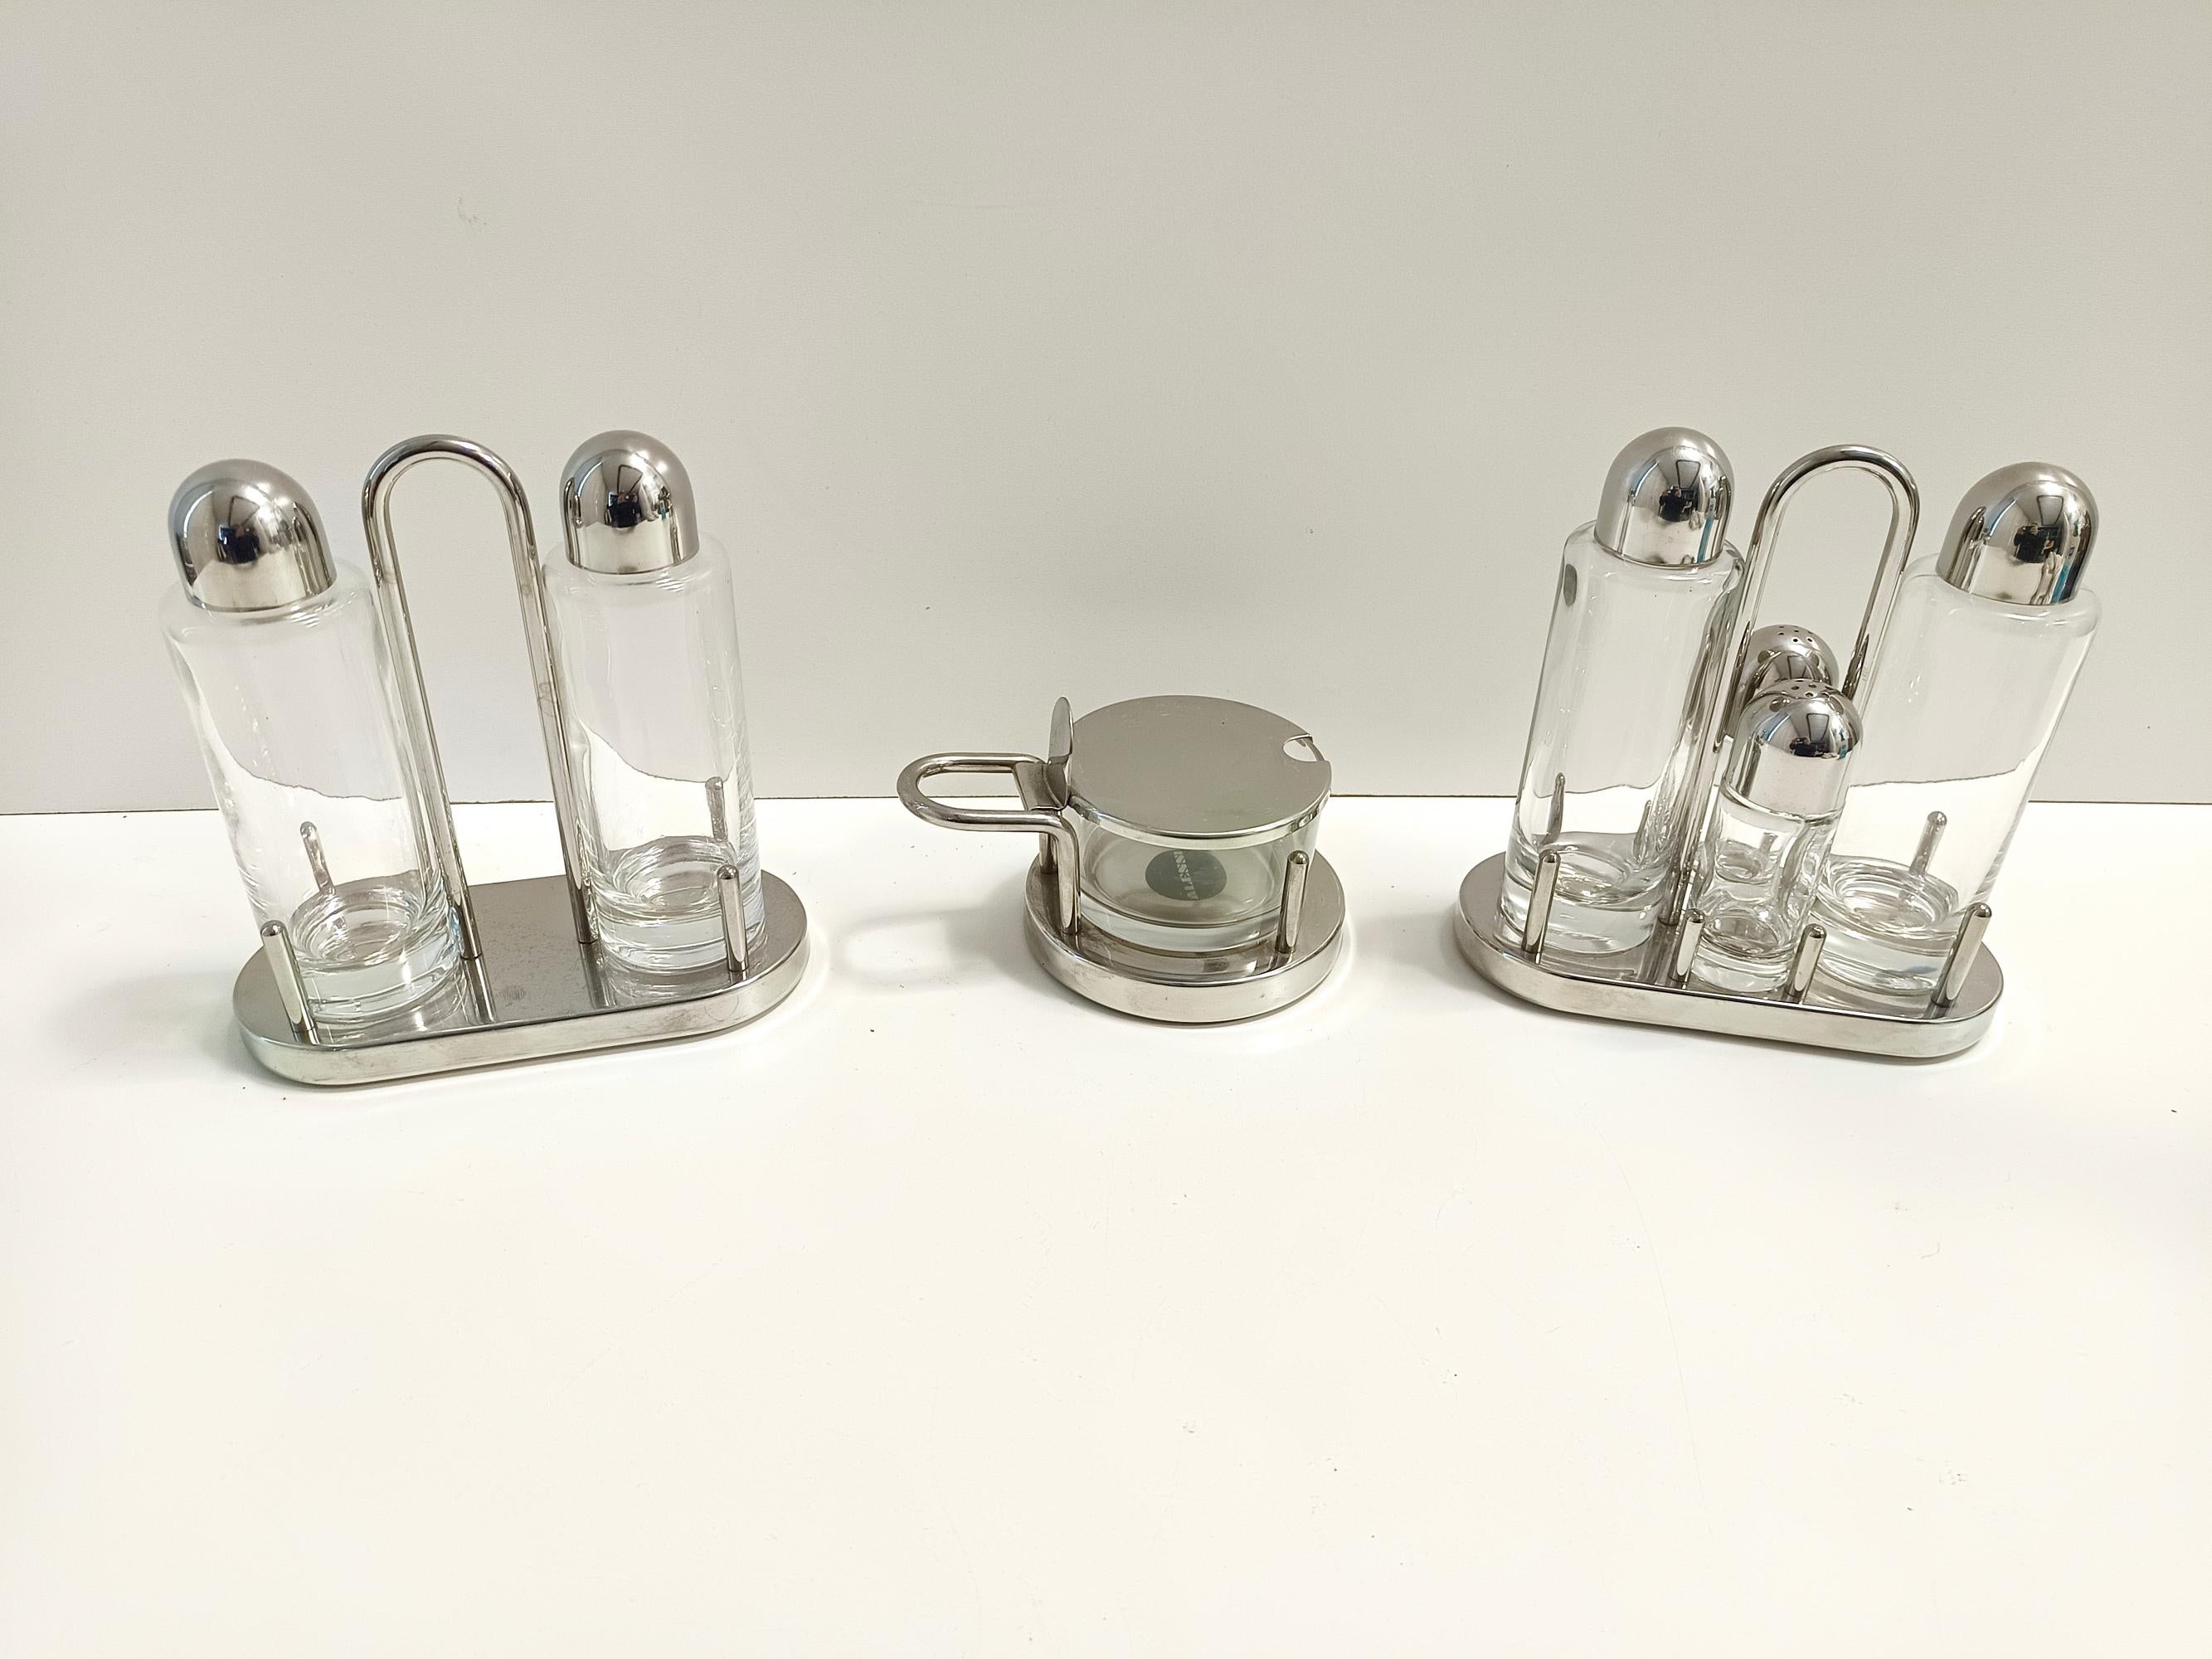 Italian Steel, Glass and Plastic Cruet Set with Cheese Bowl by E. Sottsass for Alessi For Sale